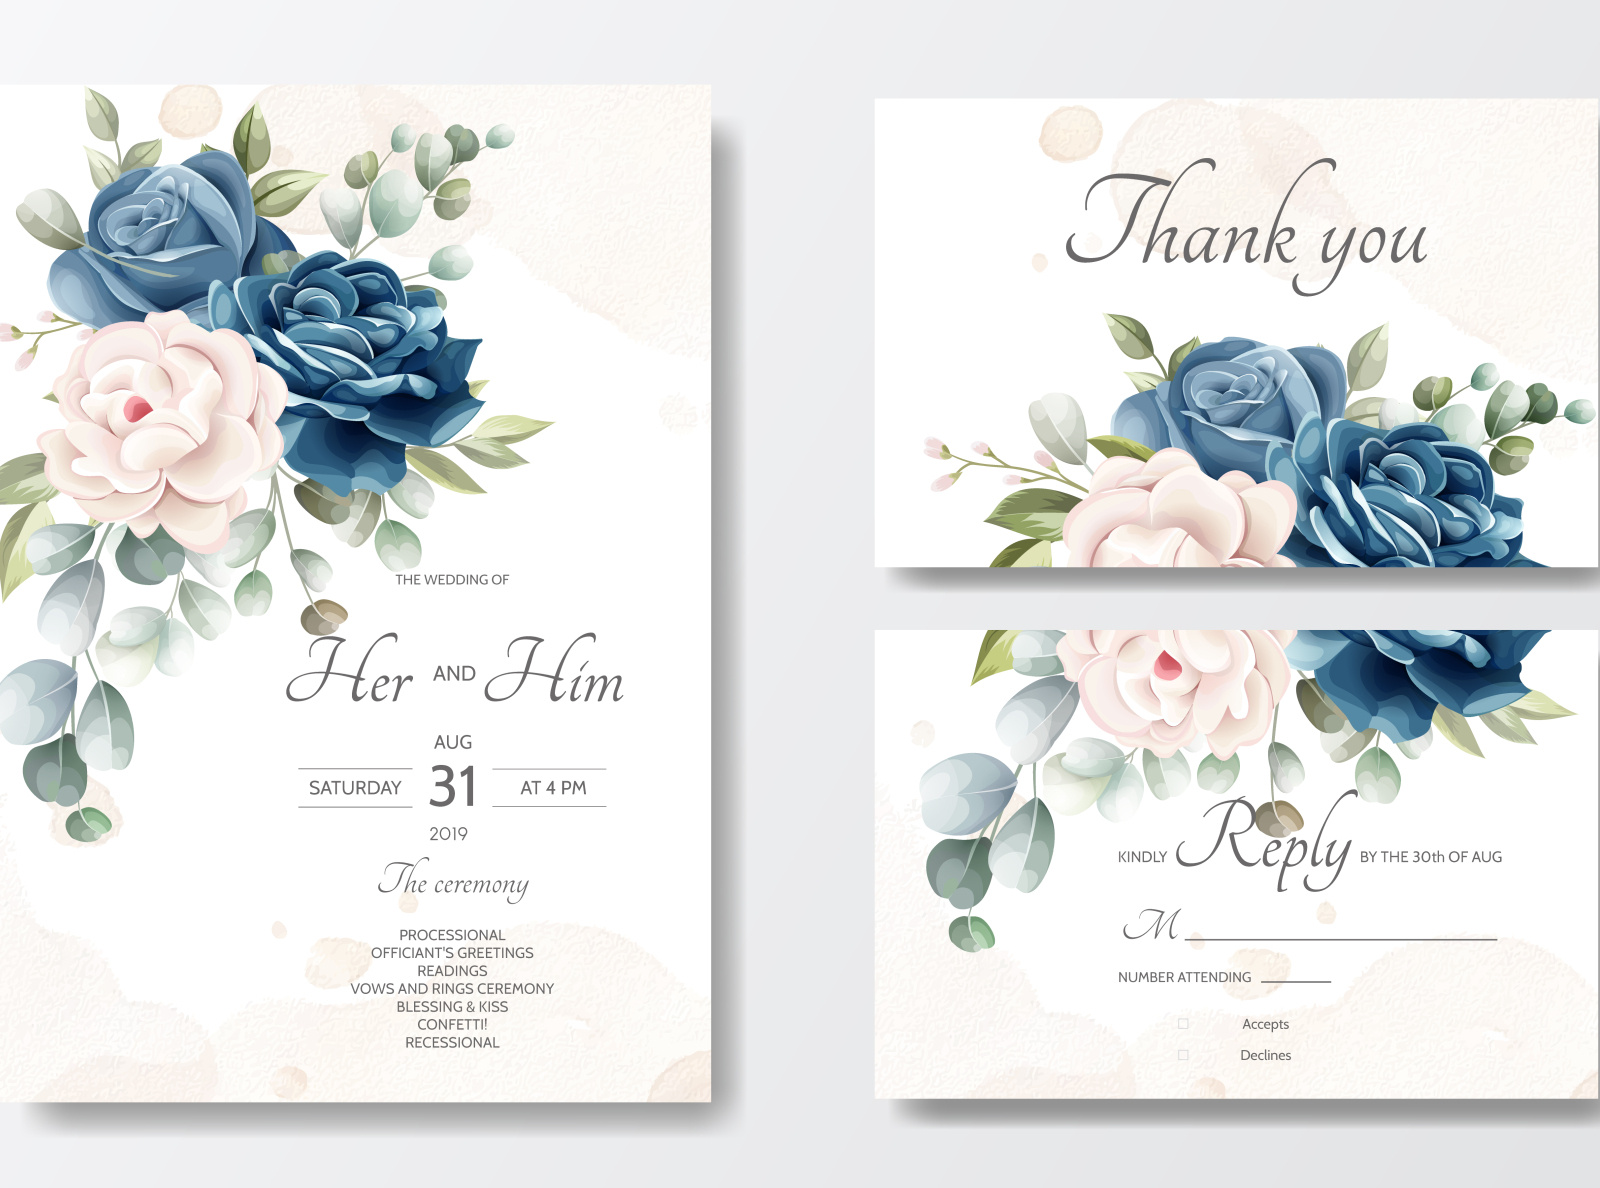 Beautiful Floral Wreath Wedding Invitation Card Template By Dino Mikael 